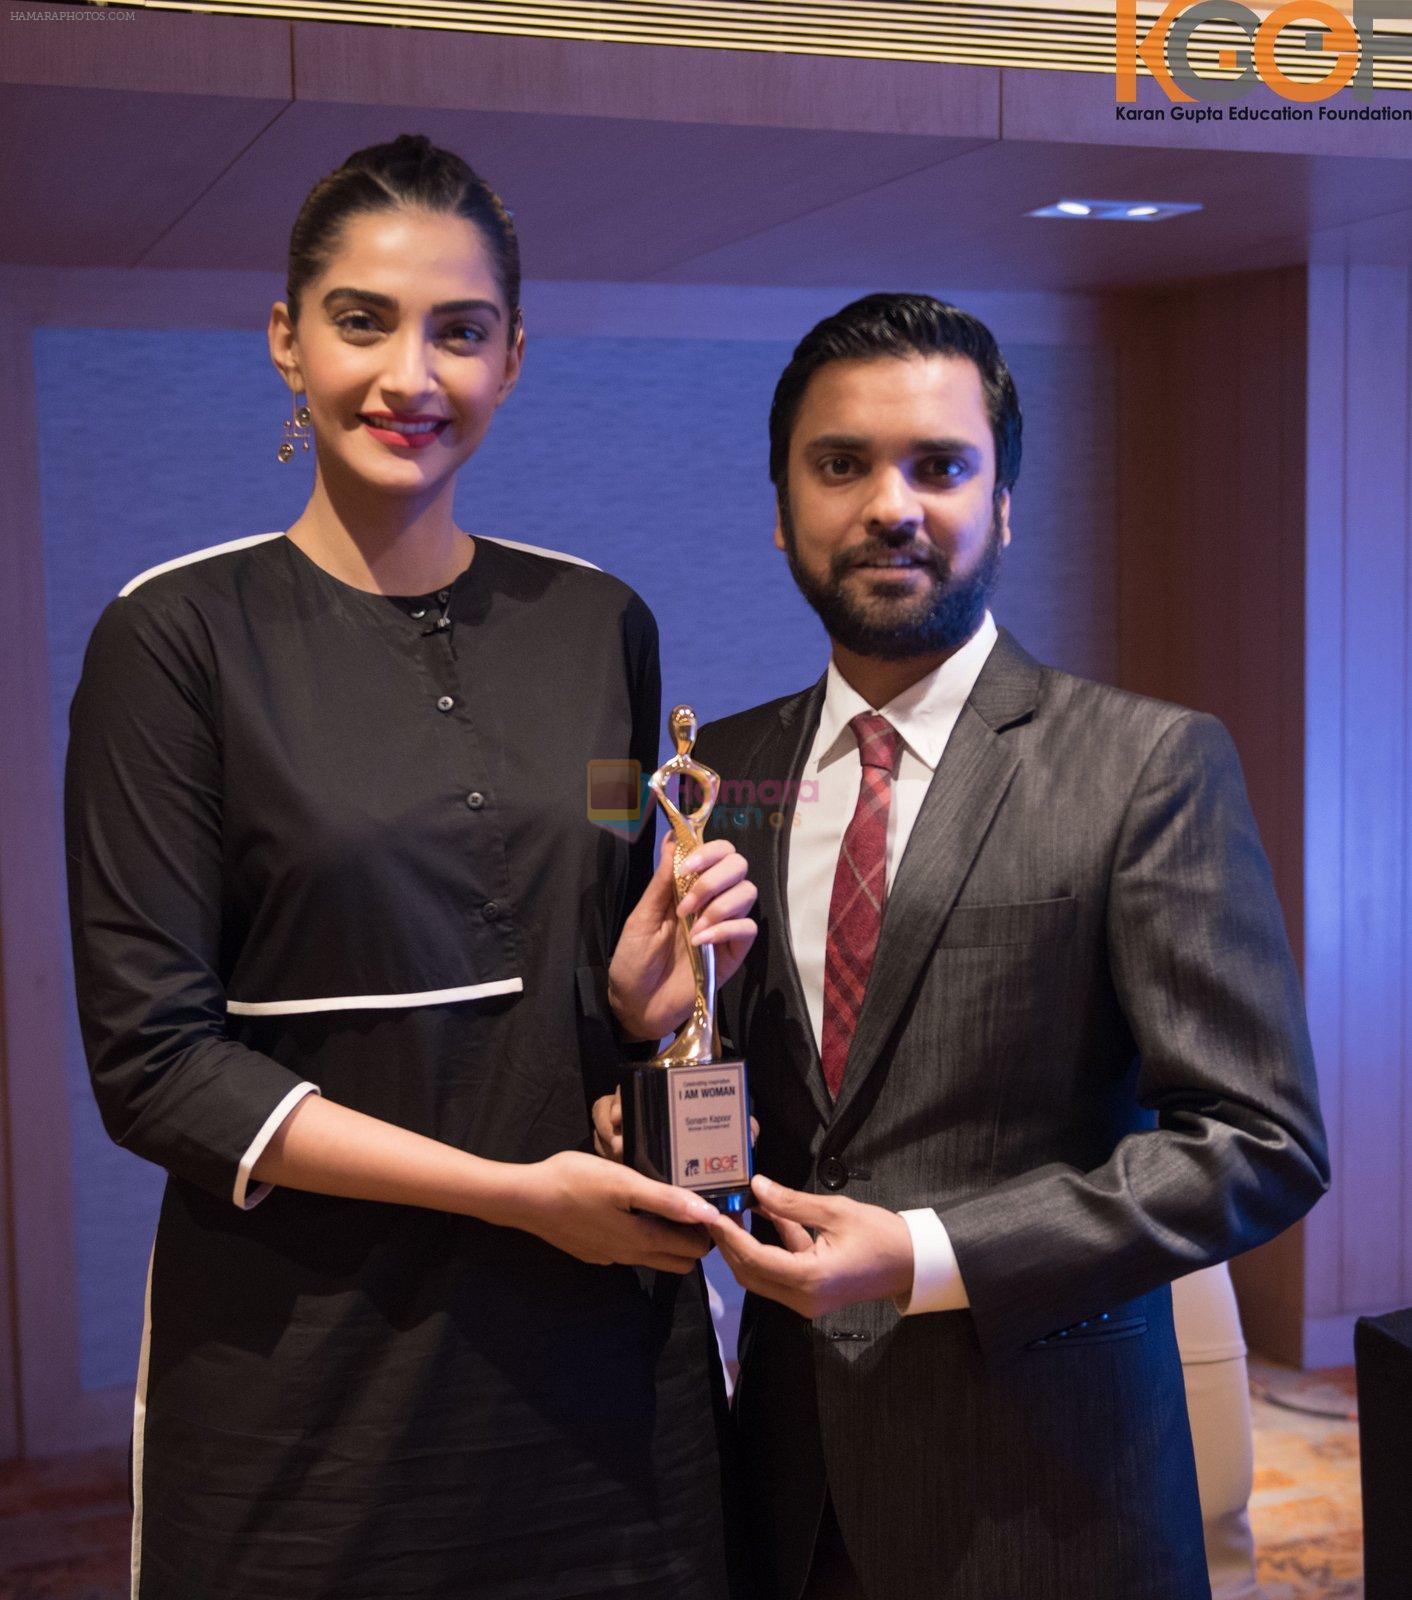 Sonam Kapoor receives the _I Am Woman_ women empowerment award on 5th April 2016